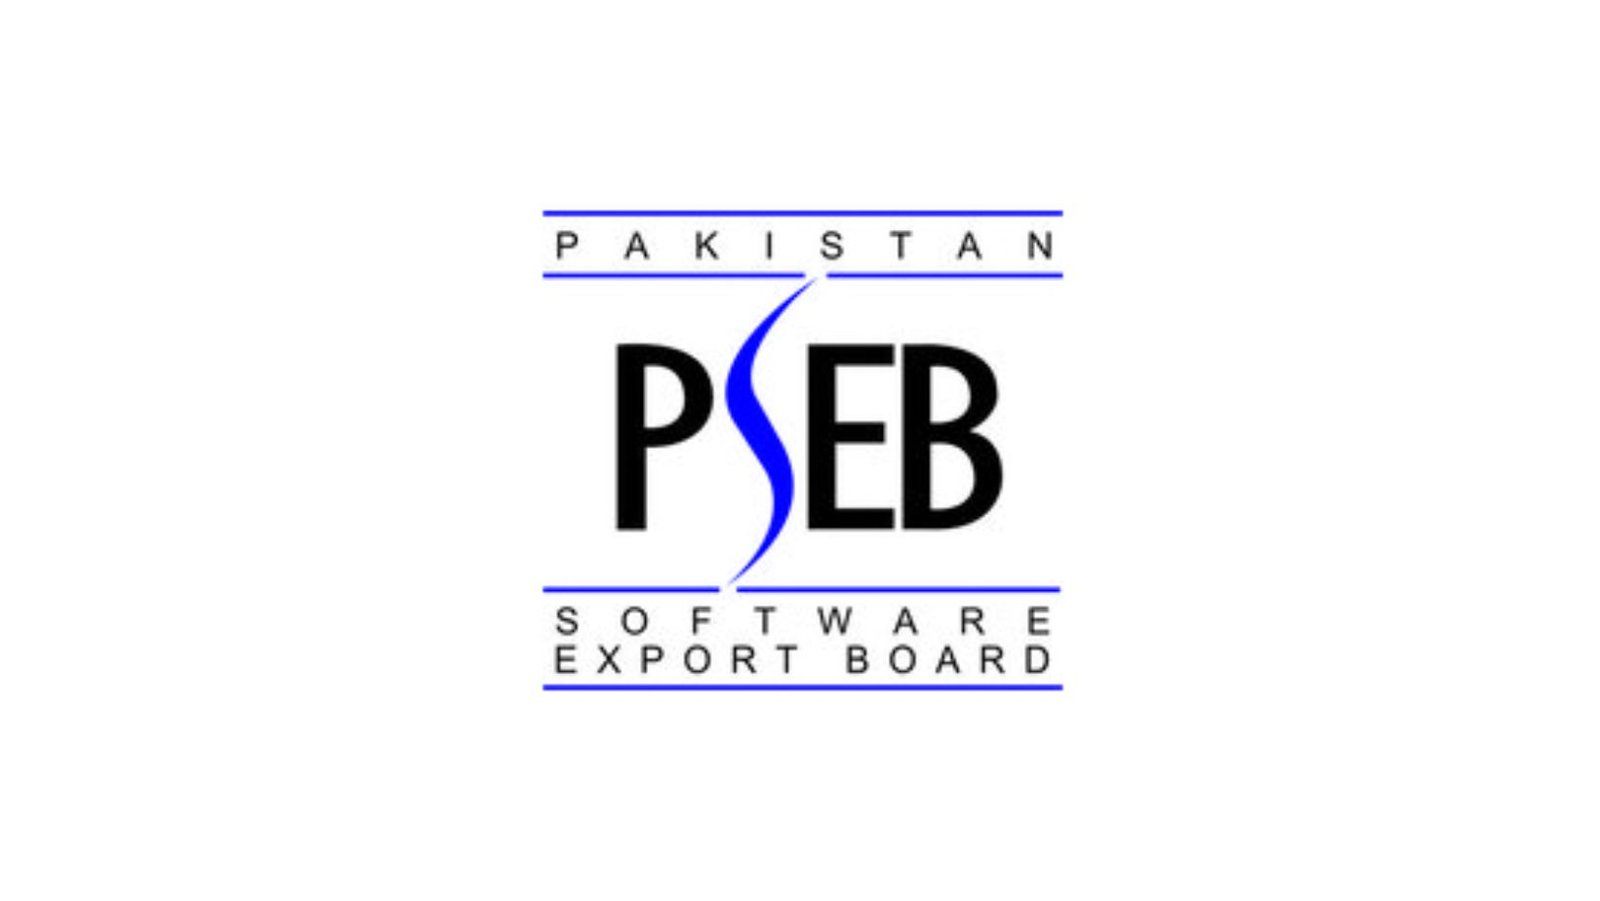 PSEB Needs Additional Resources to Meet IT Export Goal